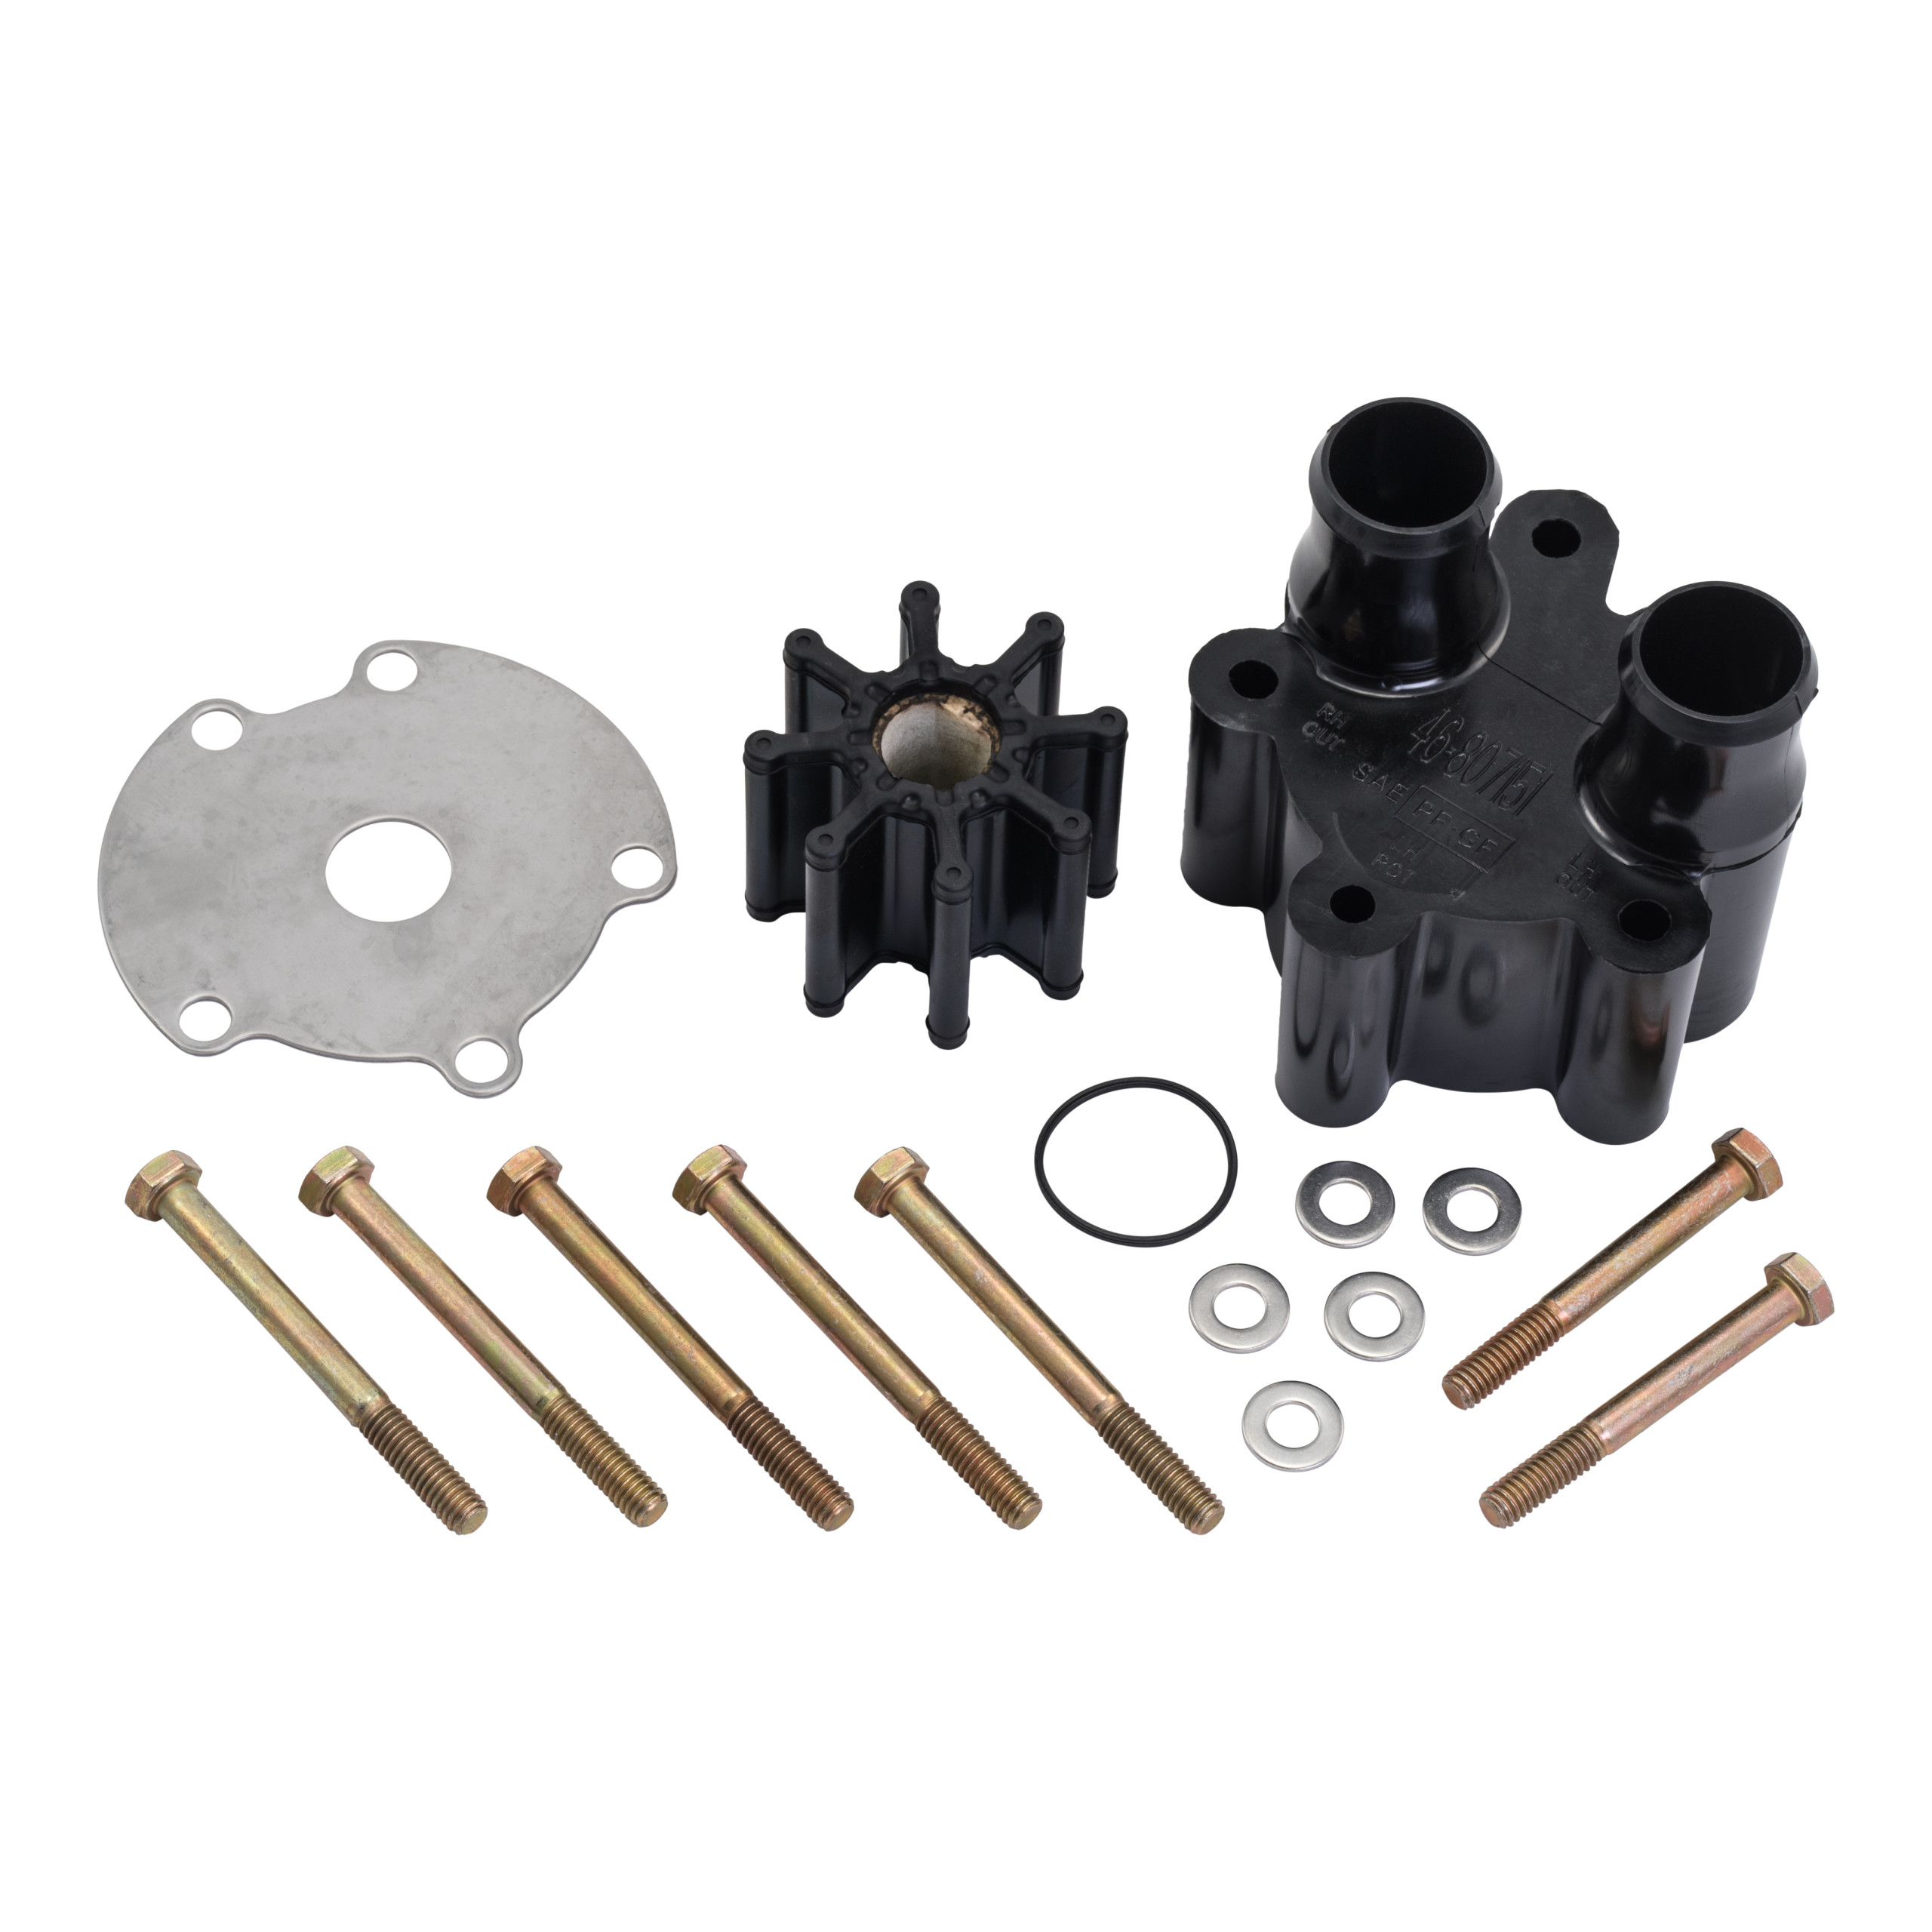 46-807151A14 Sea Water Pump Body Kit - MerCruiser Engines with One-Piece  Engine Mounted Sea Water Pumps